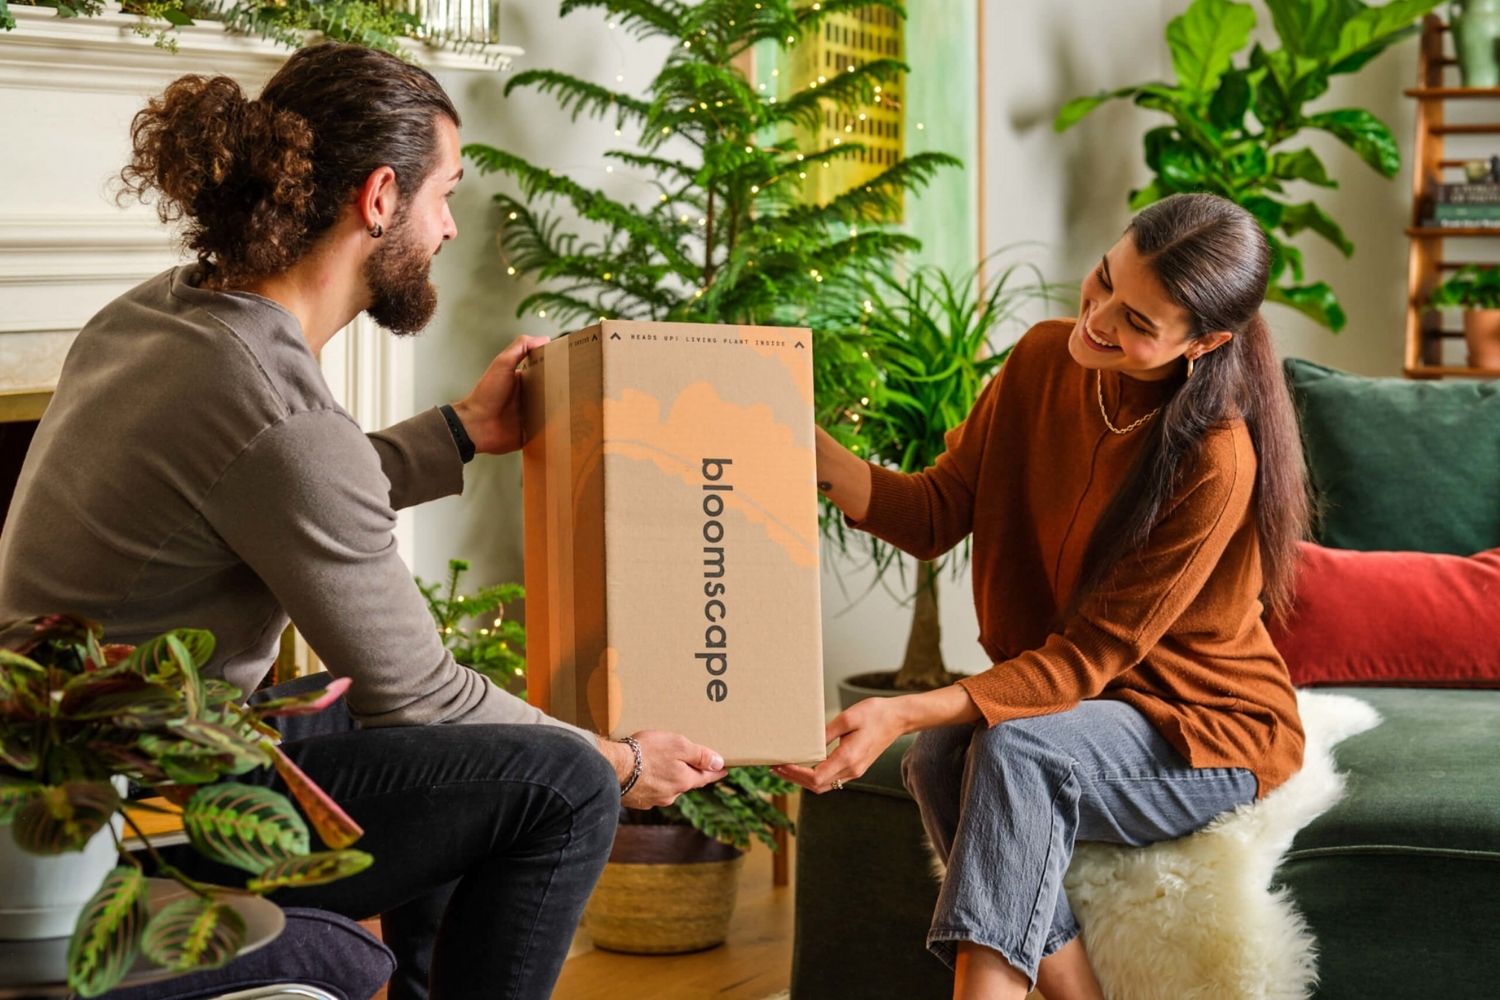 The Best Plant Delivery Service Option: bloomscape